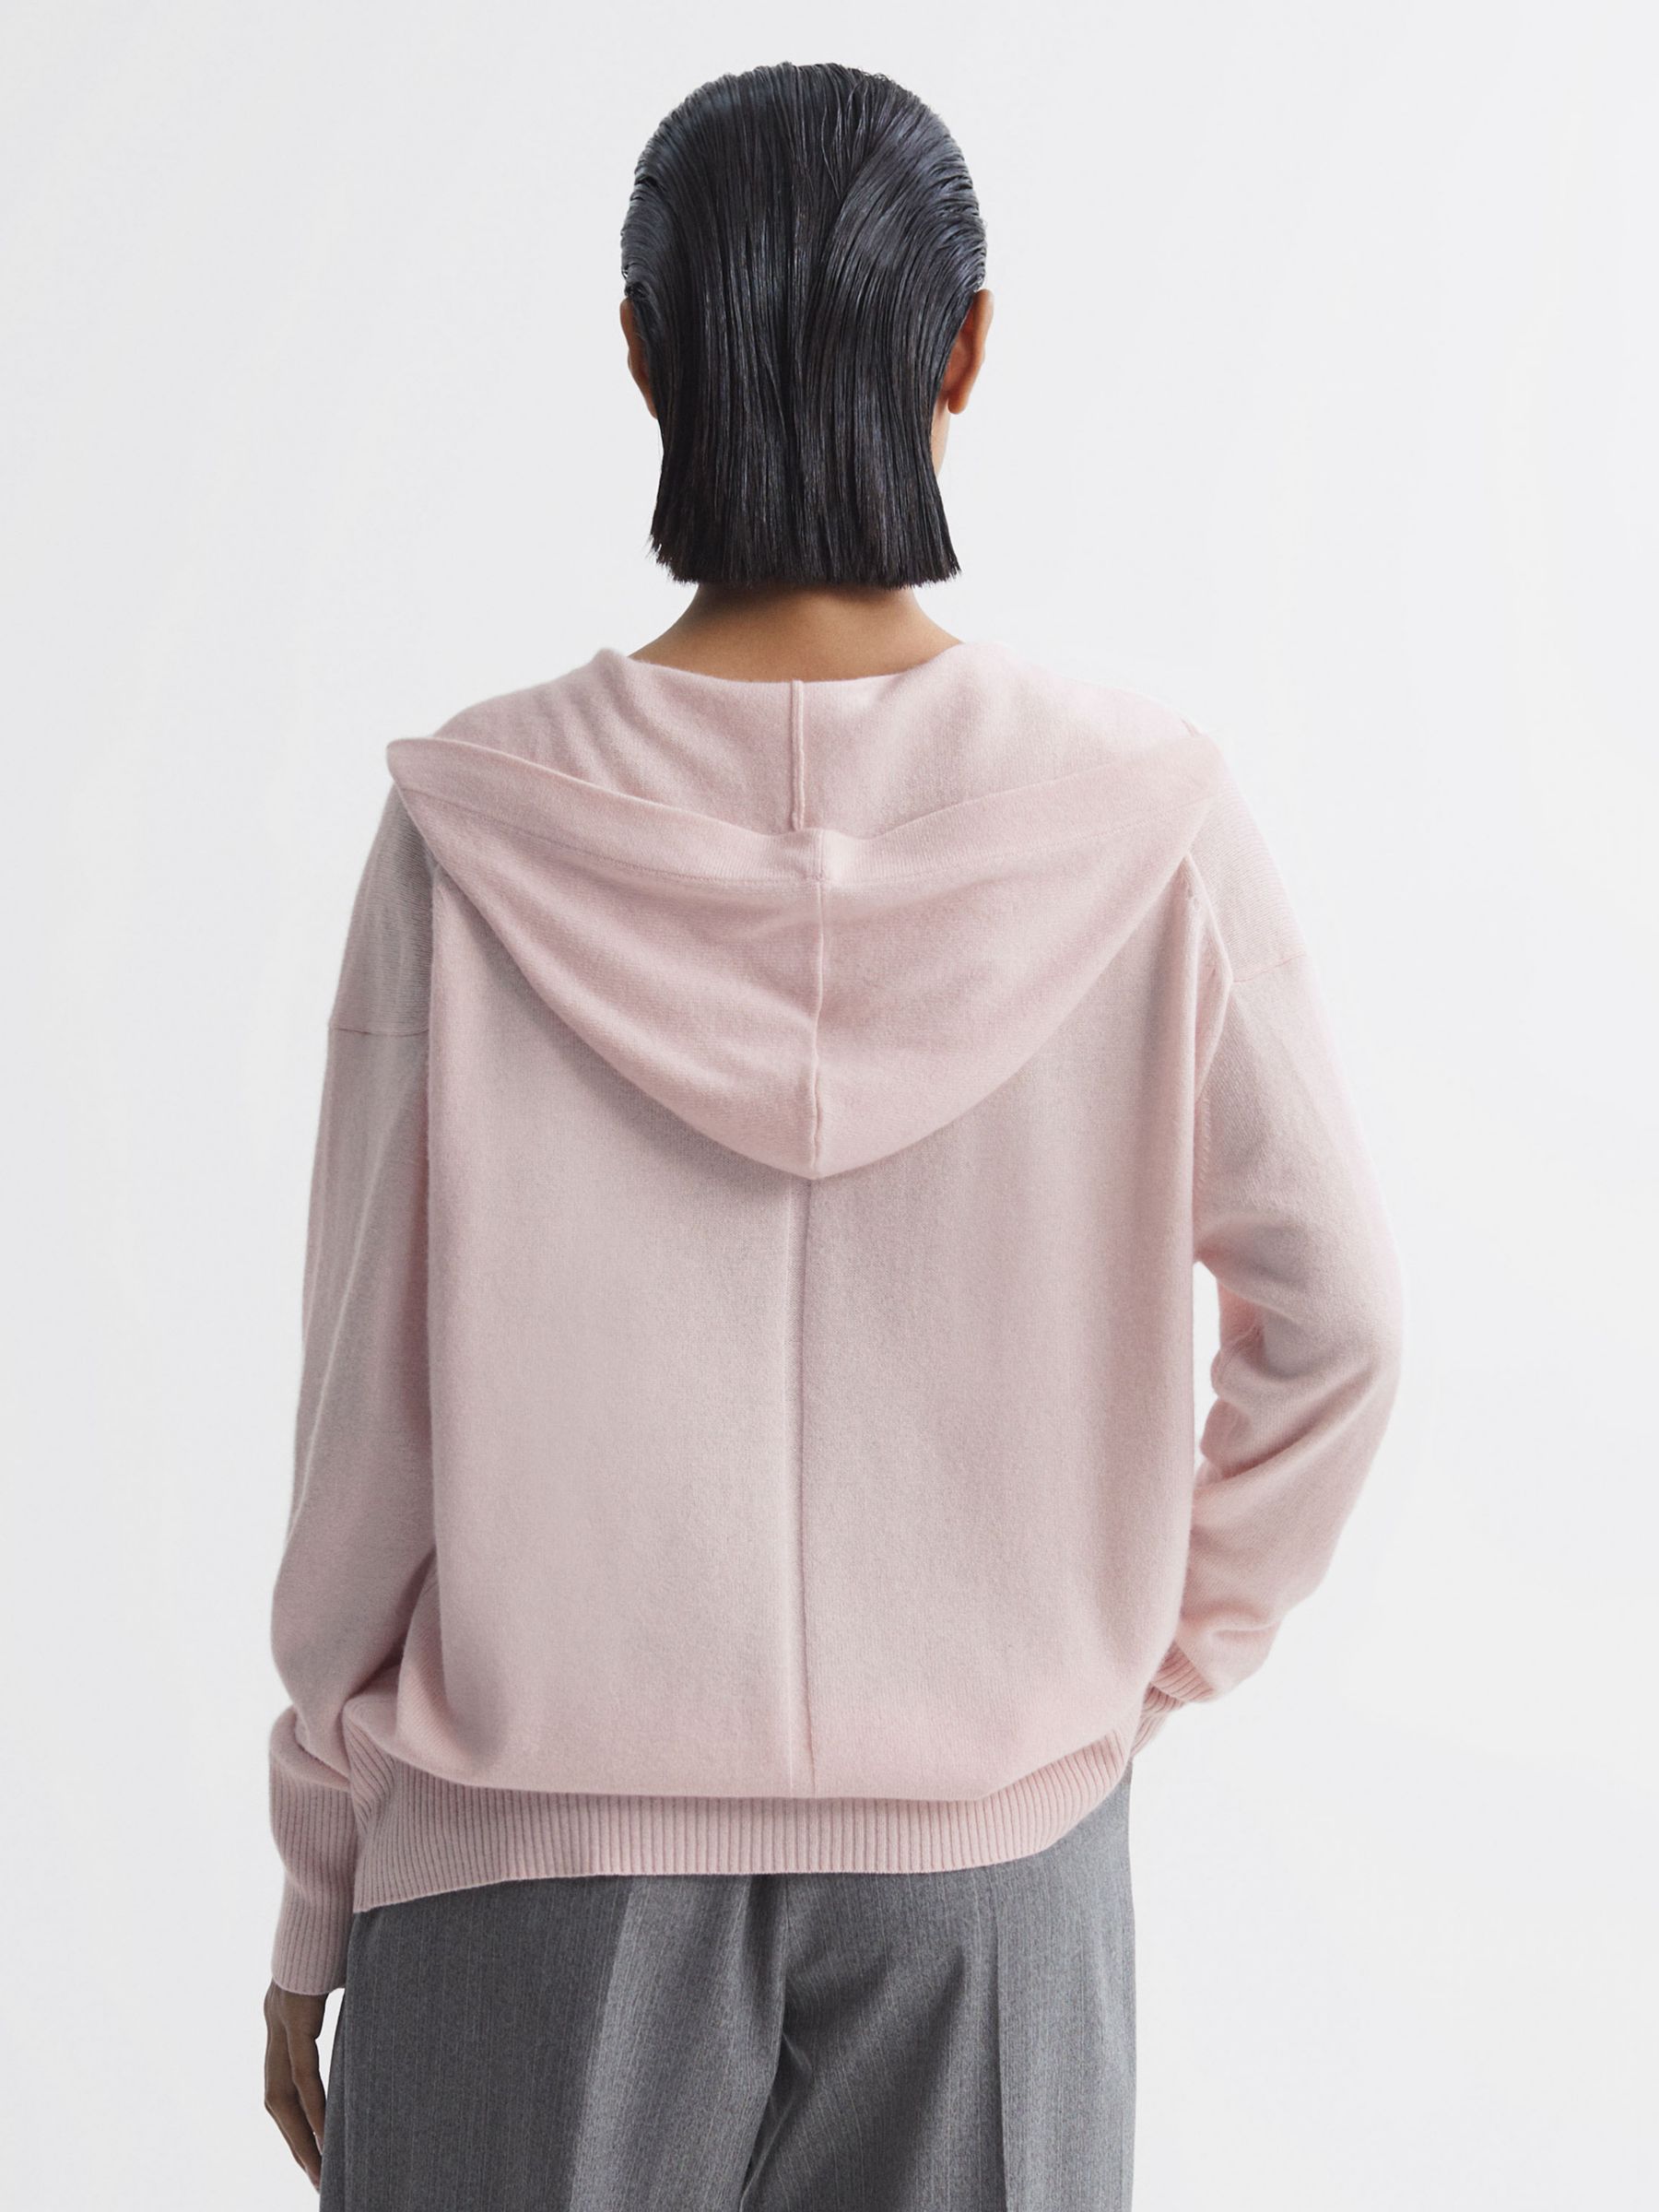 Buy Reiss Evie Hooded Cashmere Blend Cardigan Online at johnlewis.com